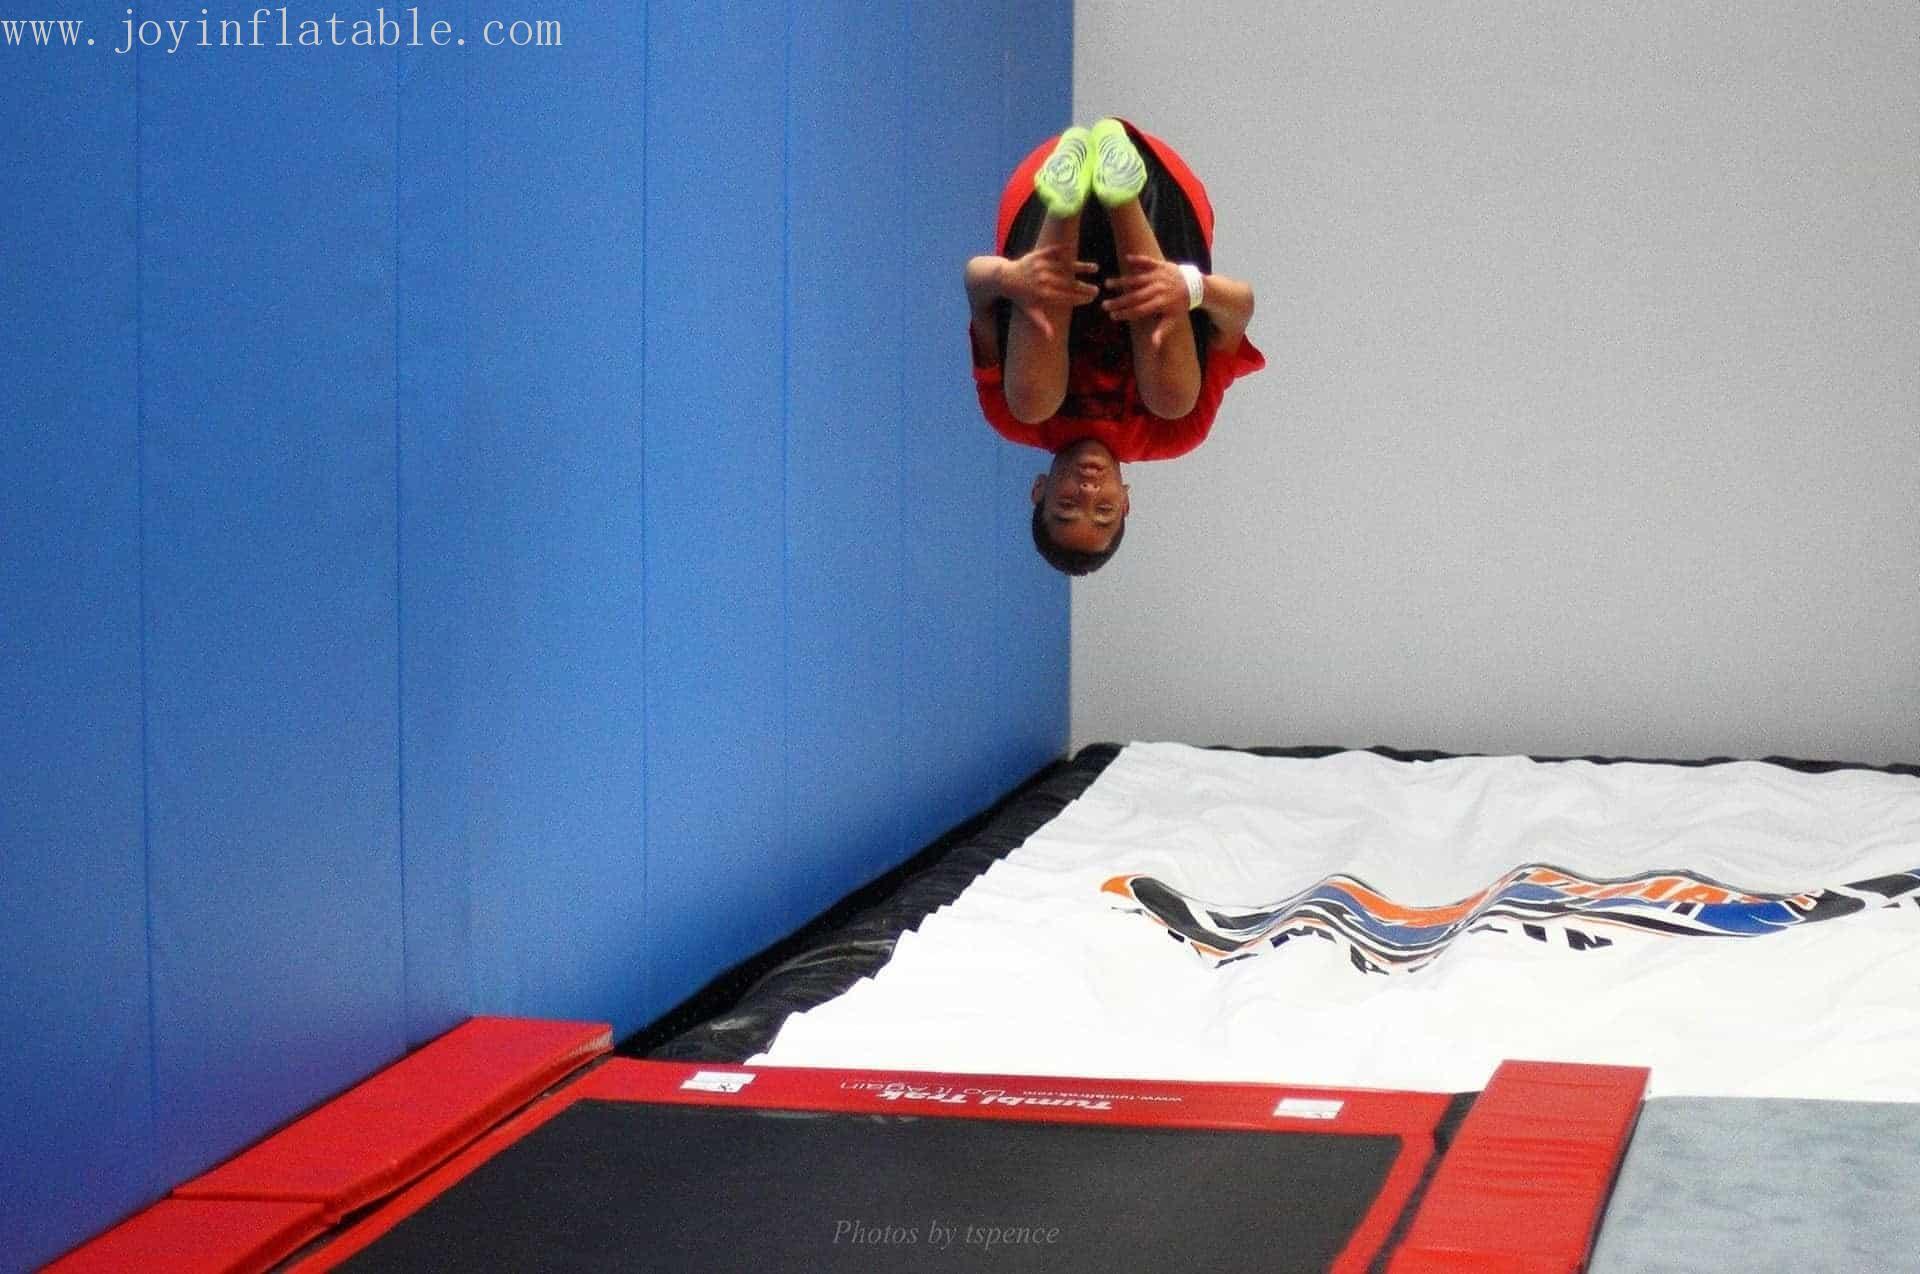 outdoor foam pit airbag from China for kids